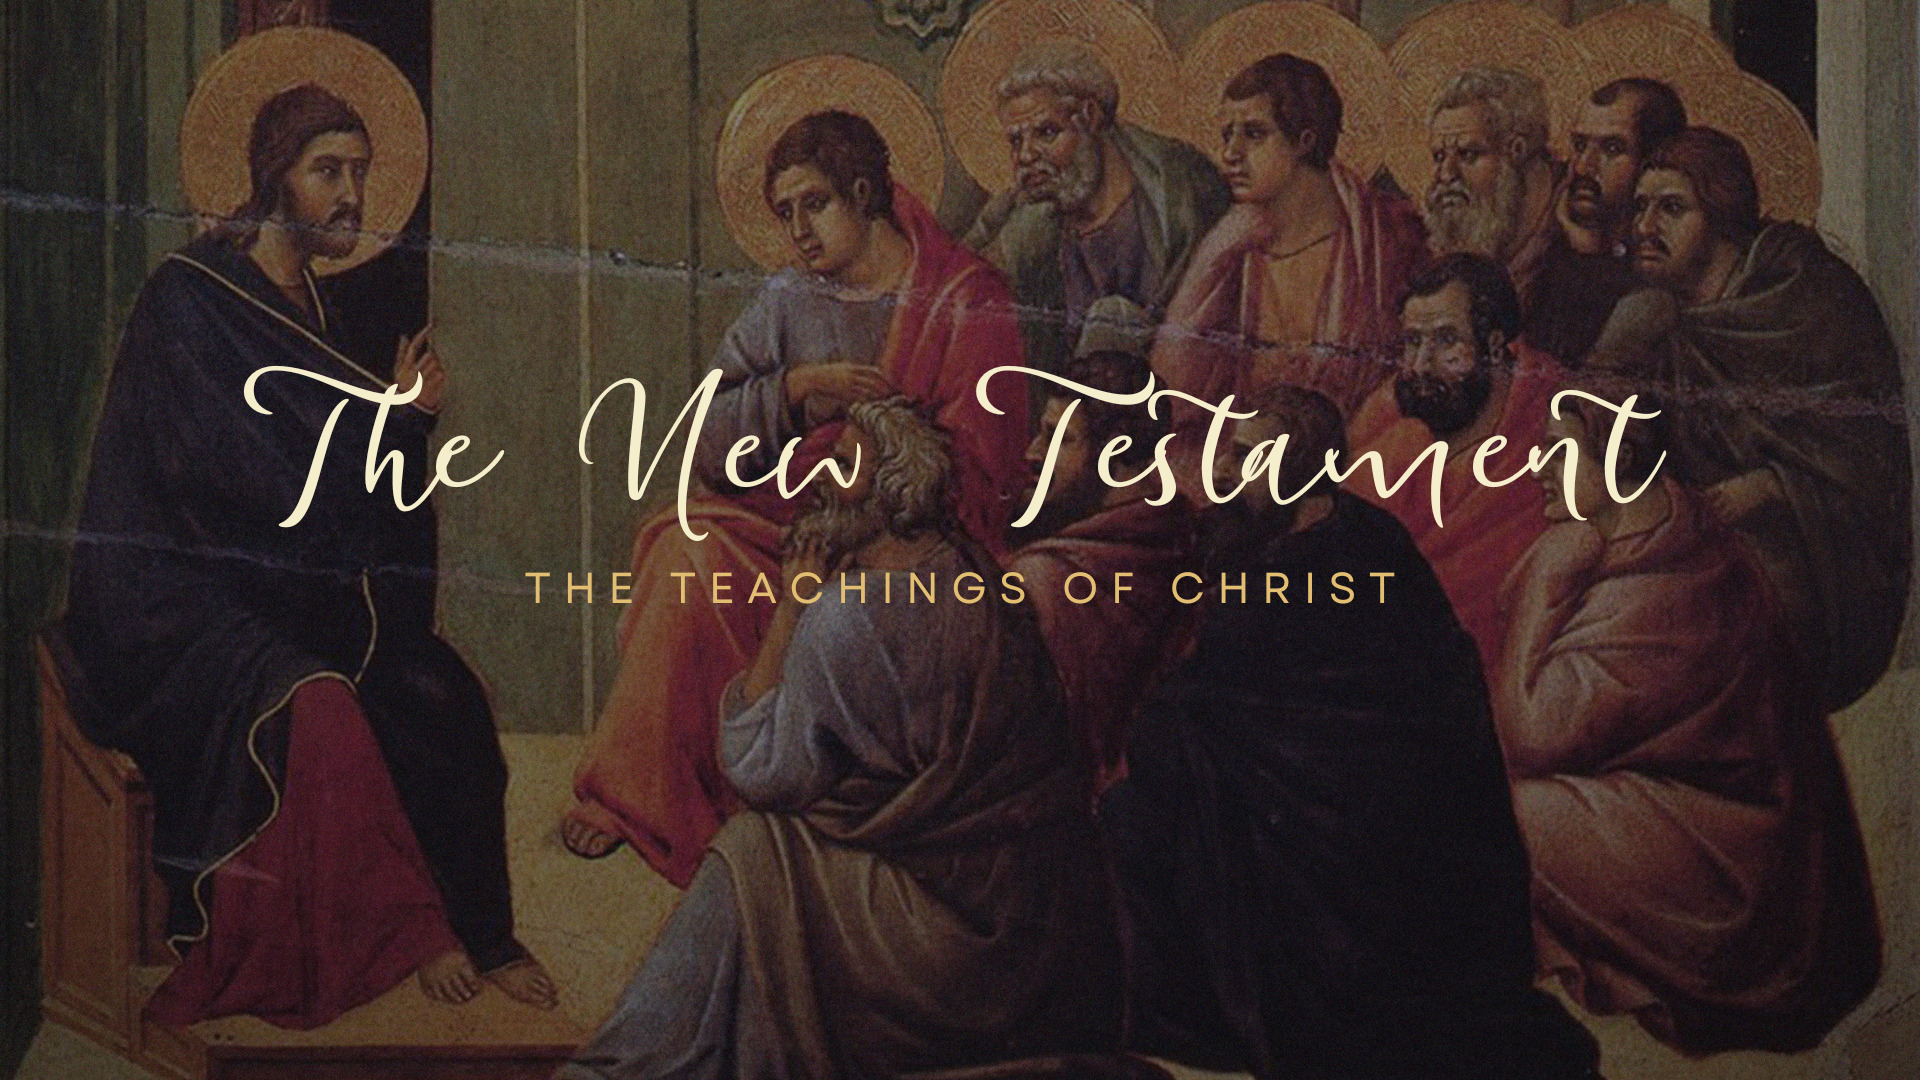 The New Testament 4K 3840 × 2160 Px | Remix Church Media | Editable Design Templates And Resources Made For The Church.